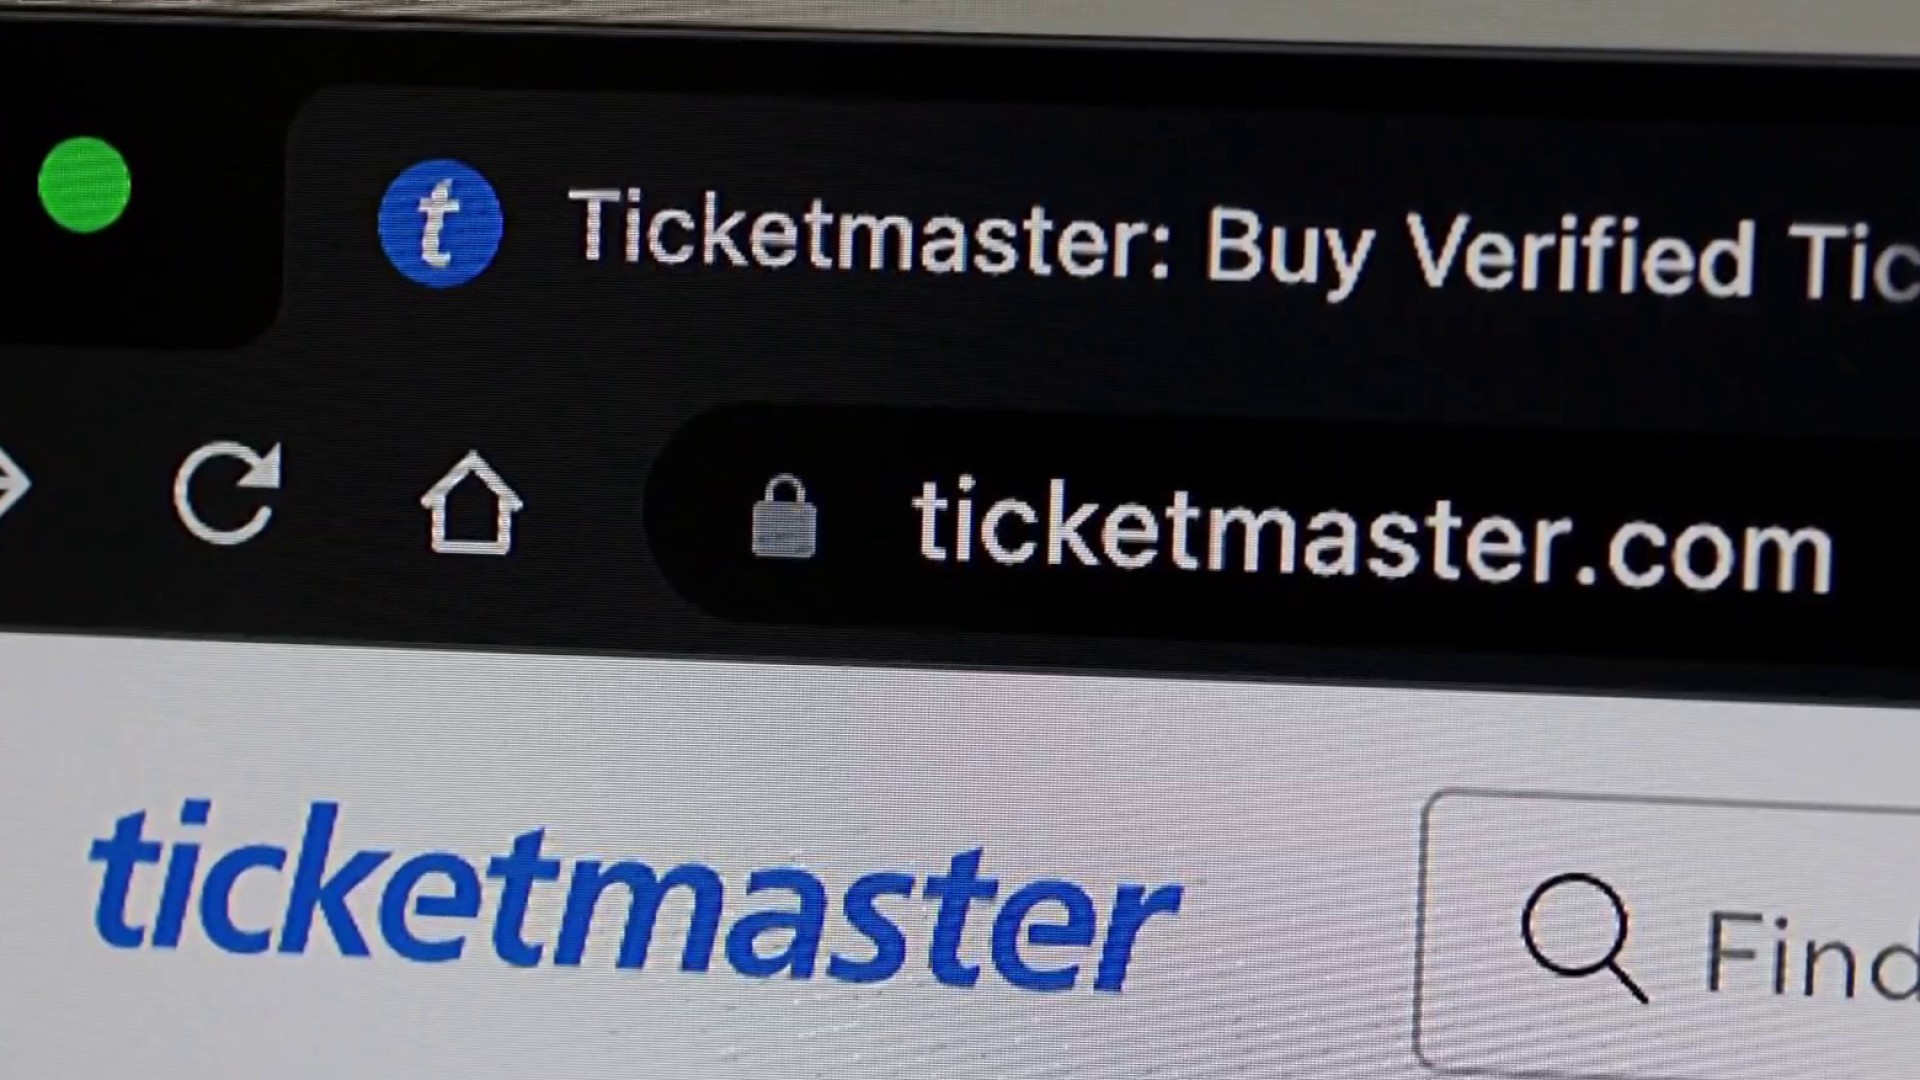 history's greatest scams - ticketmaster case - C D Ticketmaster Buy Verified Tic ticketmaster.com ticketmaster Q Find